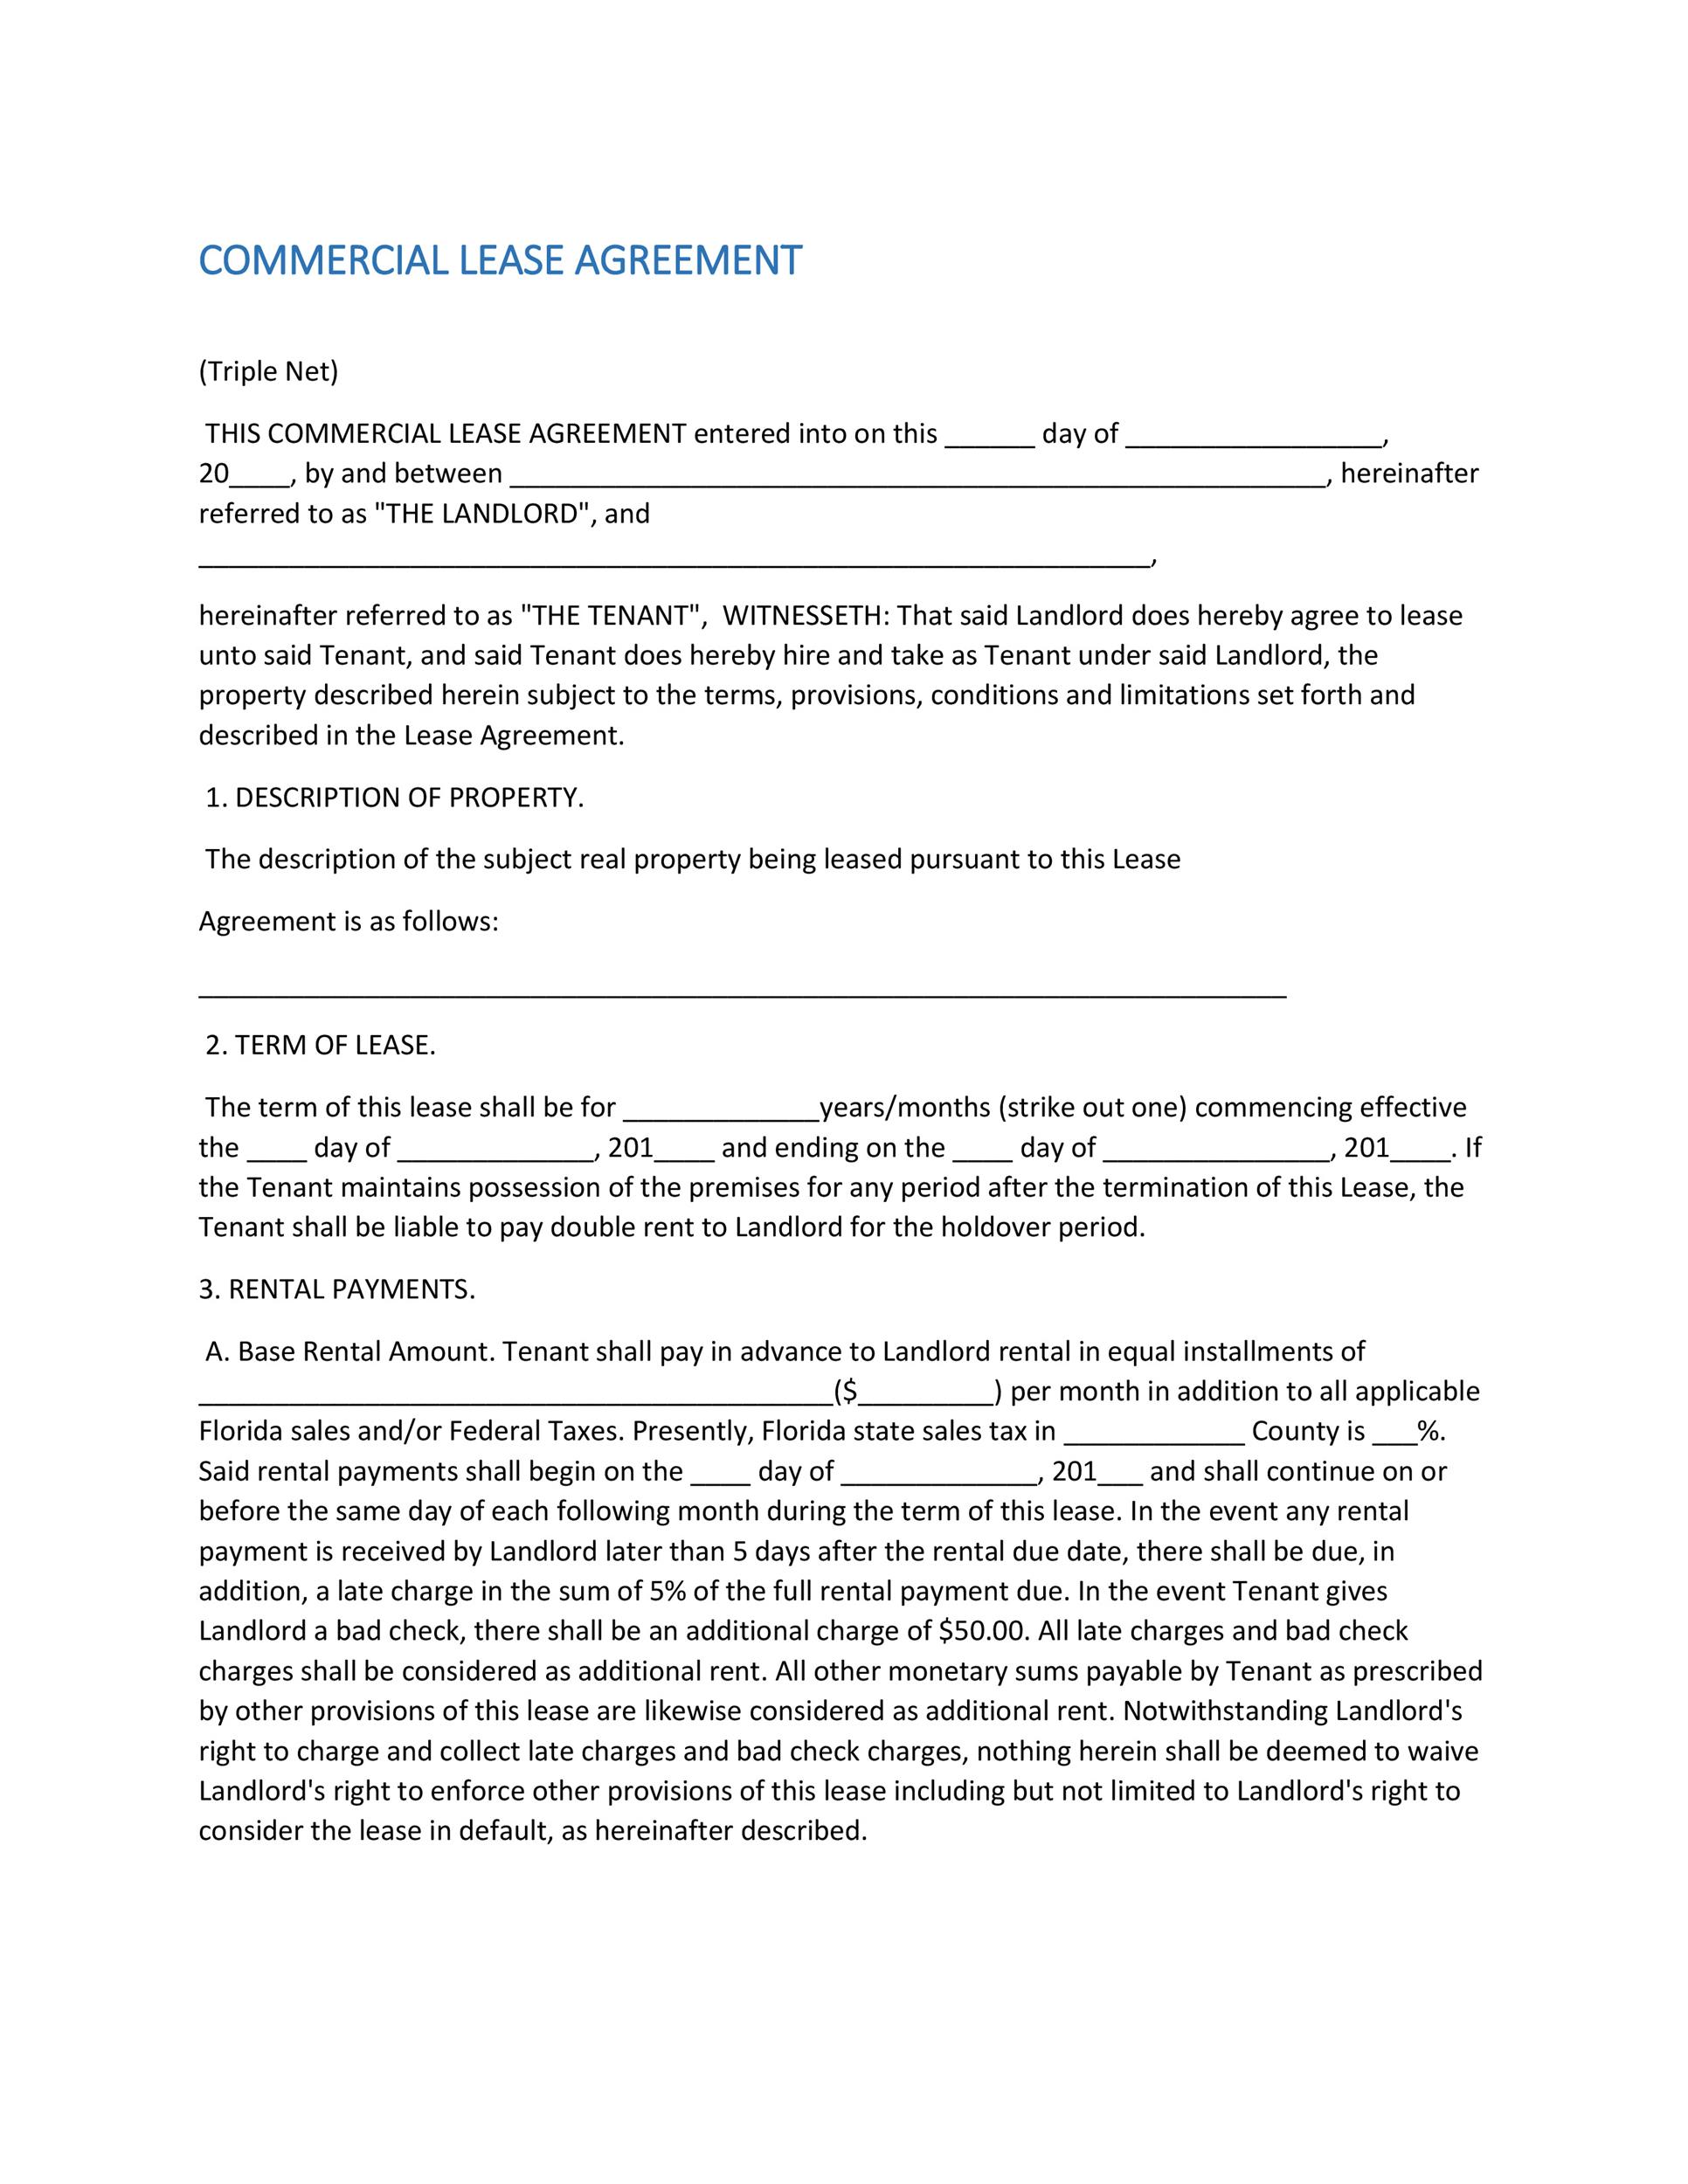 27 Free Commercial Lease Agreement Templates ᐅ TemplateLab